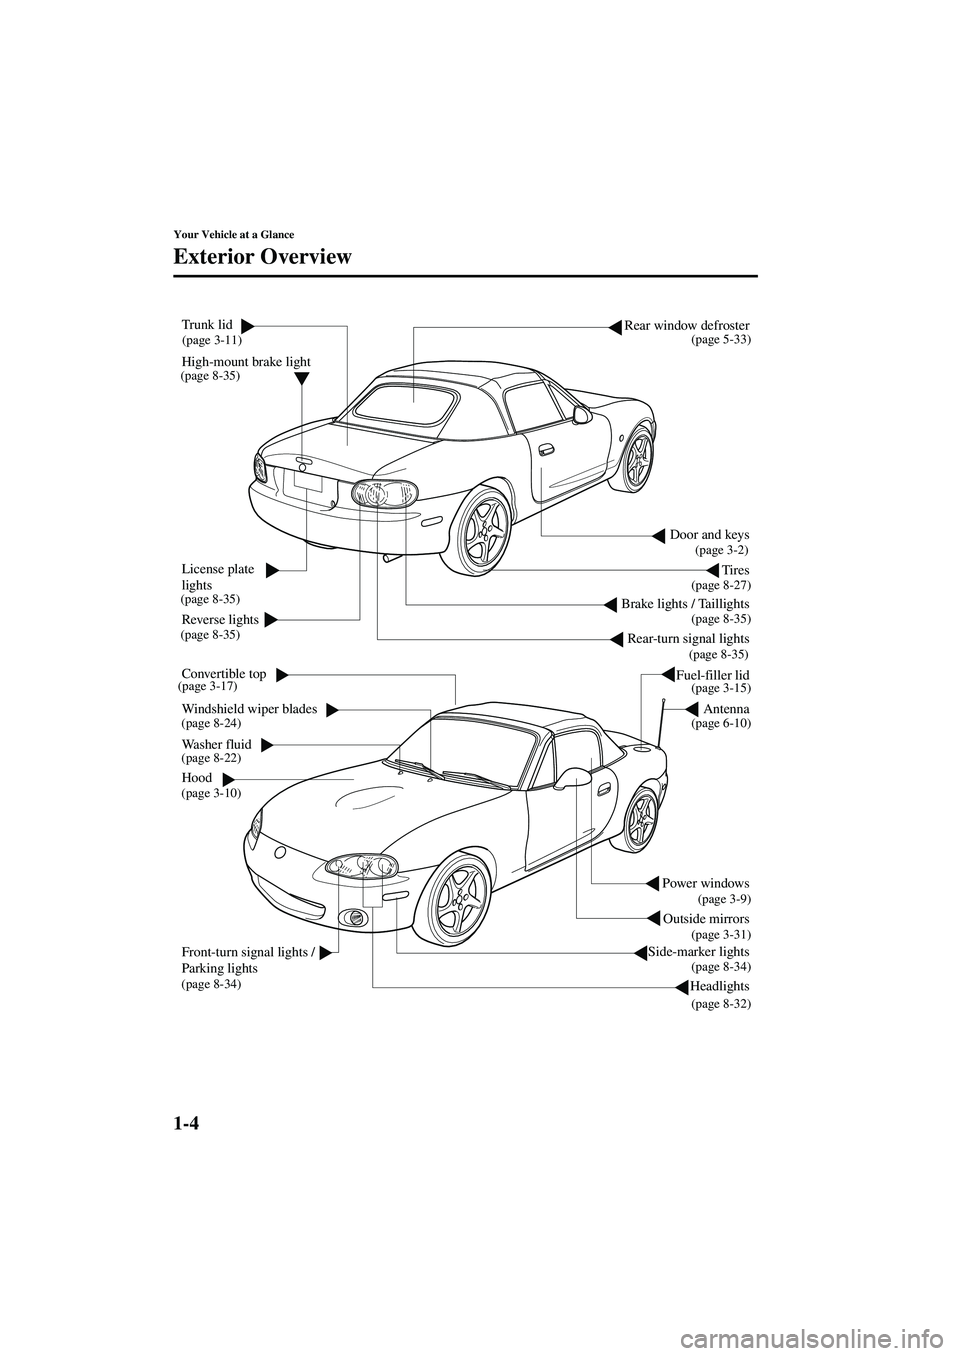 MAZDA MODEL MX-5 MIATA 2002  Owners Manual 1-4
Your Vehicle at a Glance
Form No. 8Q42-EA-01F
Exterior Overview
Door and keys
Outside mirrors
Side-marker lights
Headlights
Fuel-filler lid
Tires
Windshield wiper blades
Washer fluid
Hood
Front-tu